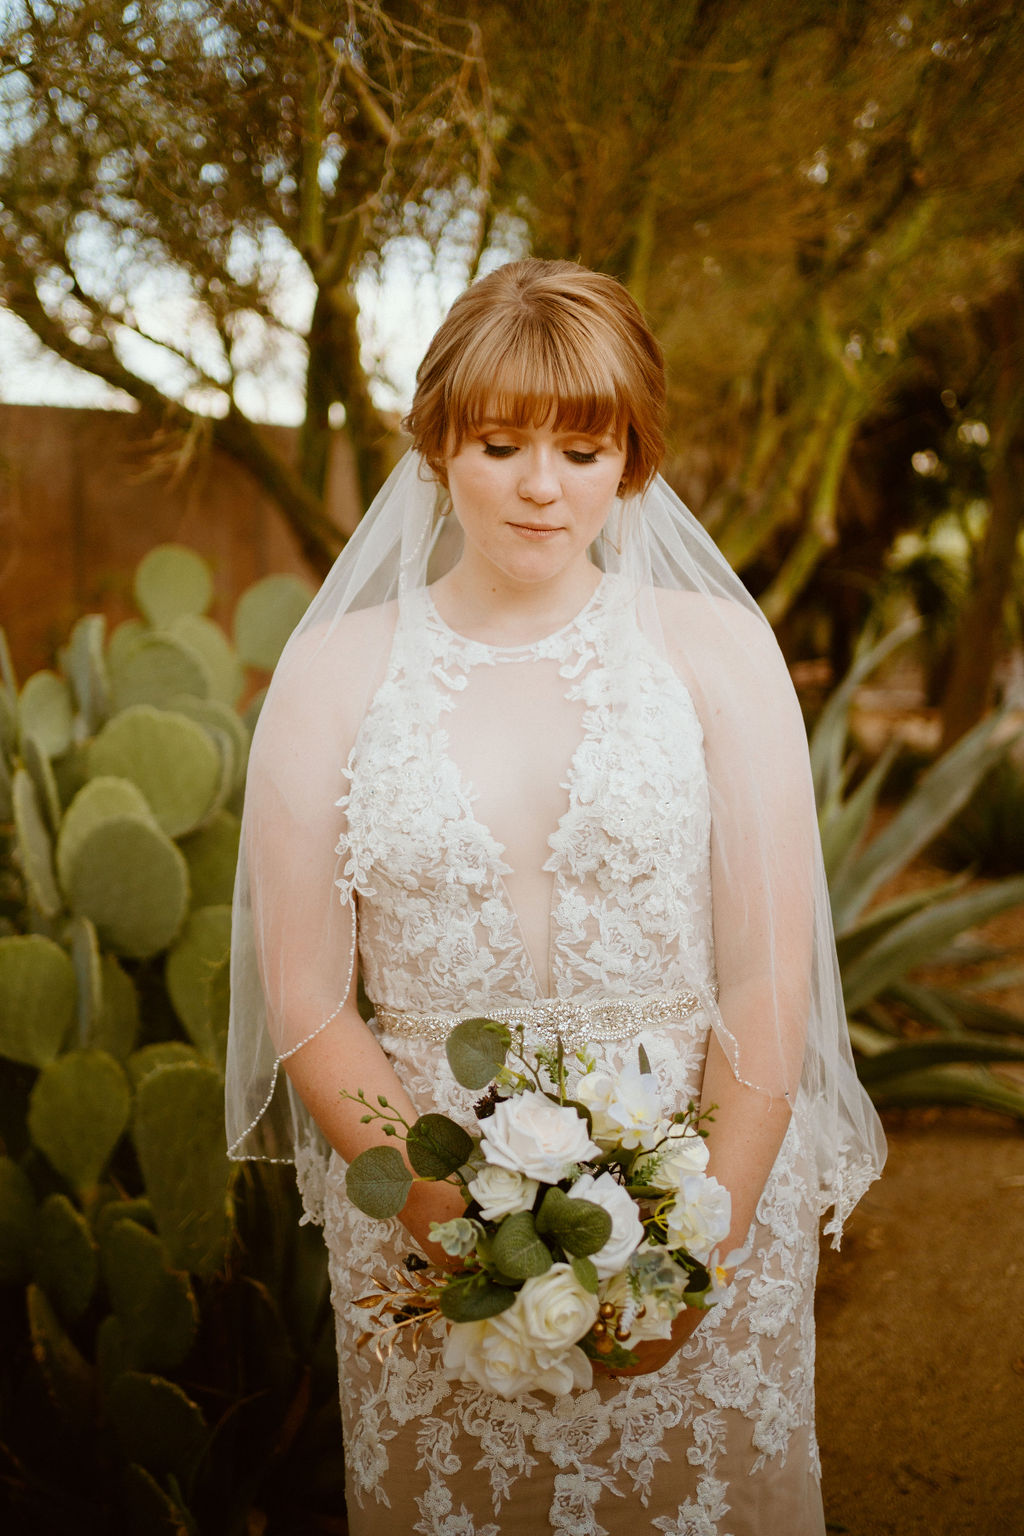 Bride with detailed lace dress and white rose bouquet with greenery 